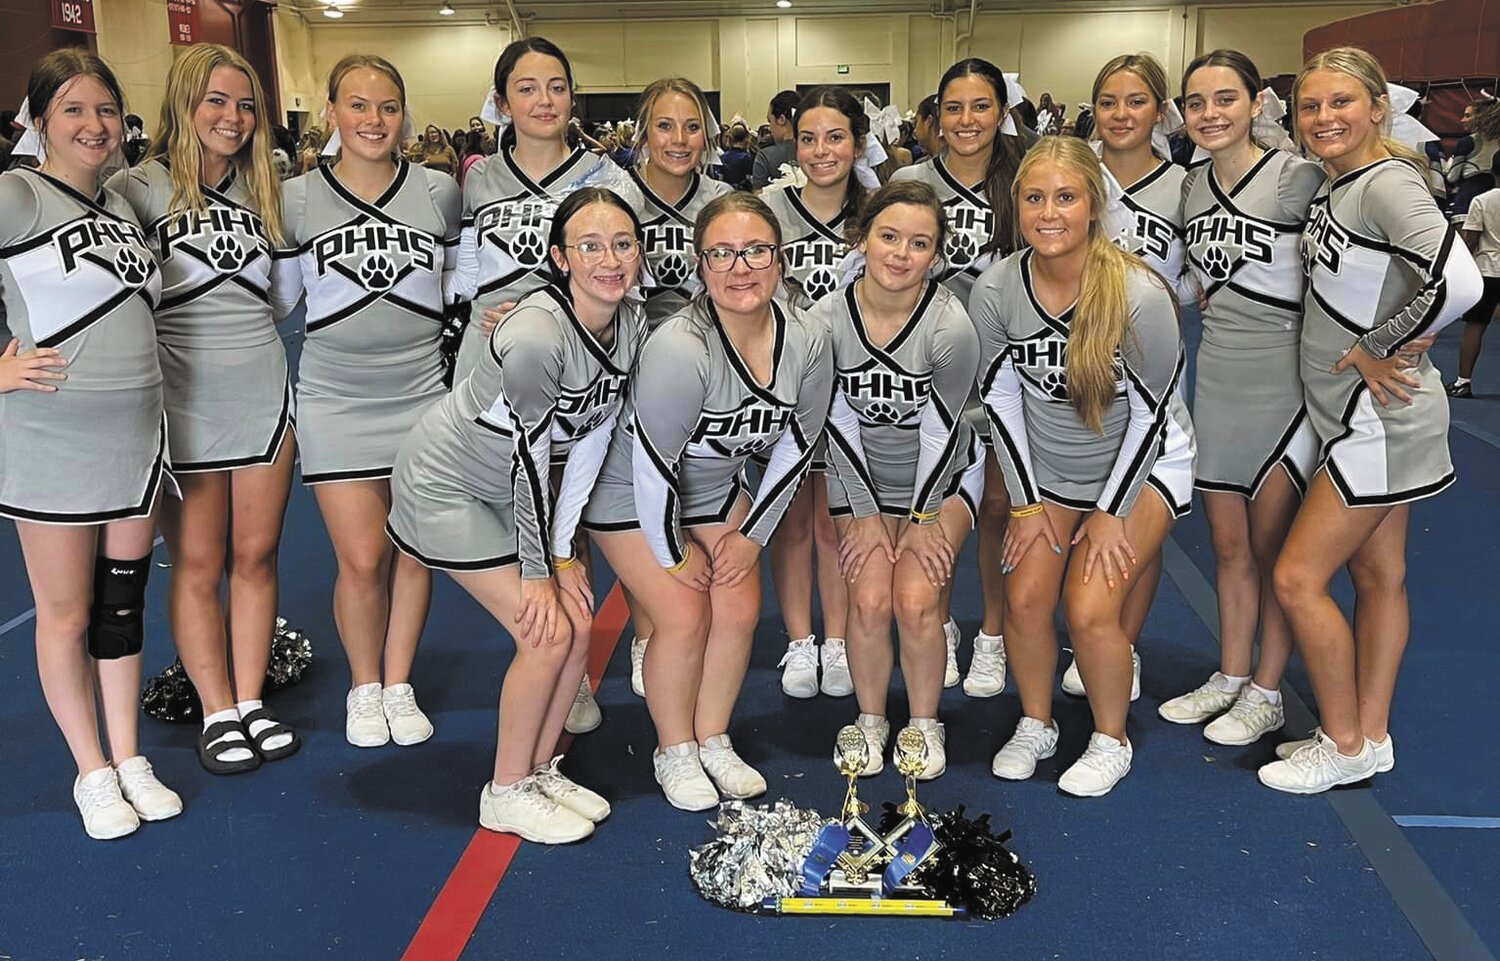 Members of the cheerleading squad attending camp were front row, Karley Fellows, Madi Coleman, Morgan Shillings and Lily Roosevelt; and back row, Maddie Ryan, Emma Patton, Arielle Hartman, Hailey Bonomo, Madi Atkinson, Devin Jones, Kenadie Cooper, Kenleigh Berry, Abbi Bonomo and Ashlyn Bryant. Not pictured are cheer coaches Brittany Kimbro, Randi Long and Katelyn Williams.